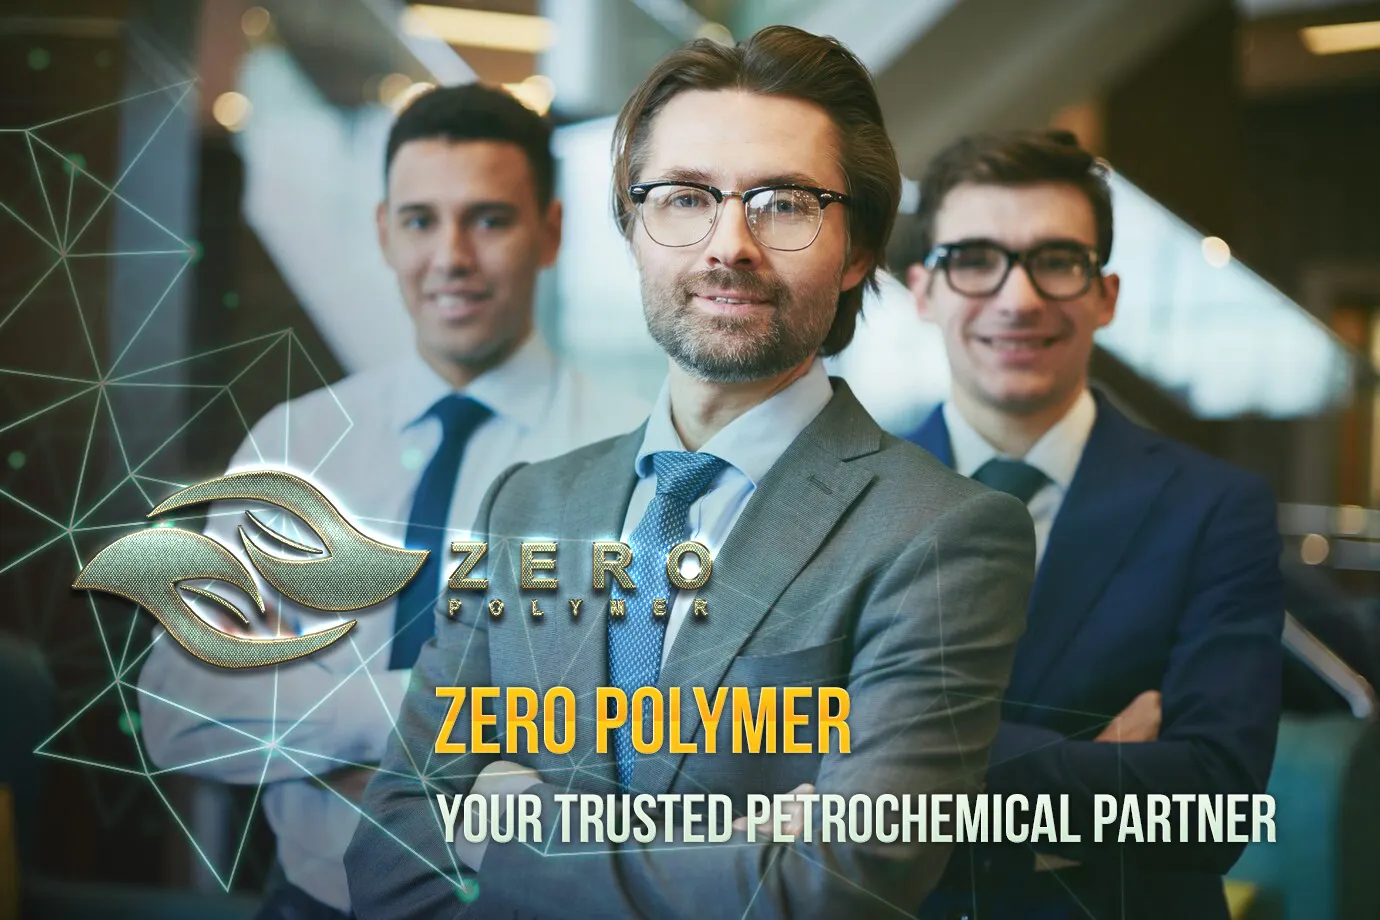 Zero Polymer Staff - Your Trusted Petrochemical Partner